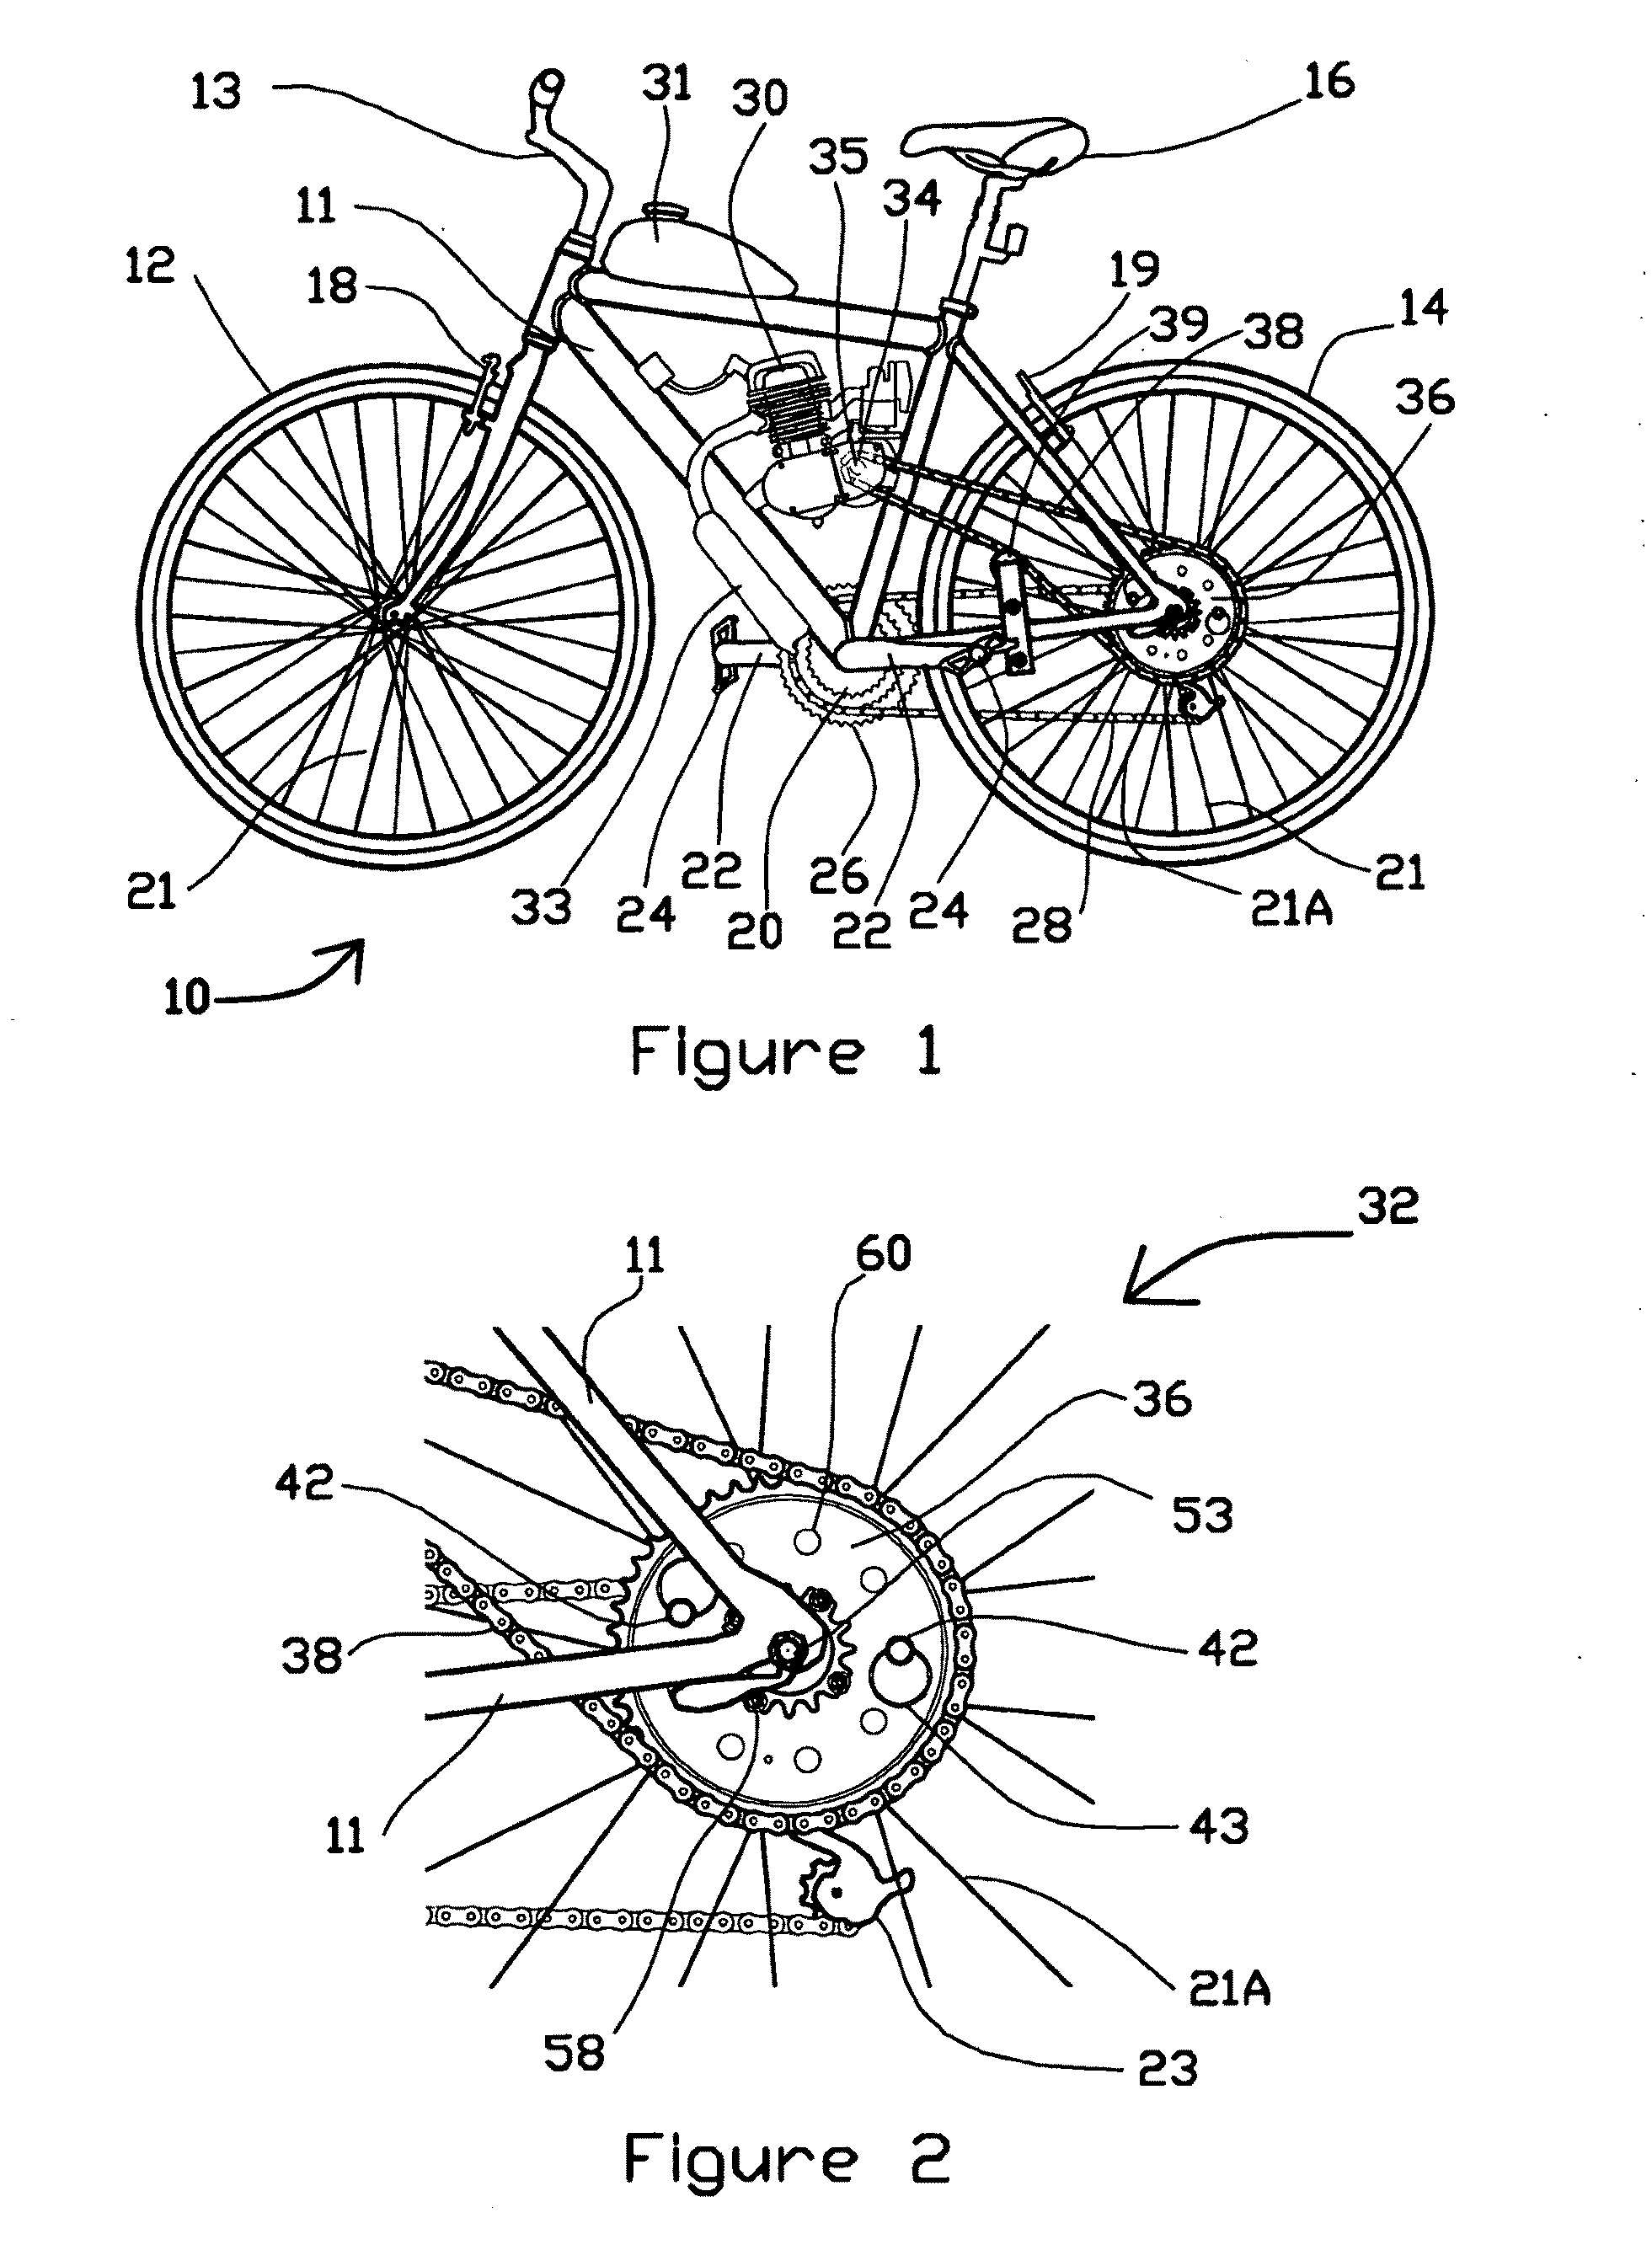 Transmission system for a cycle